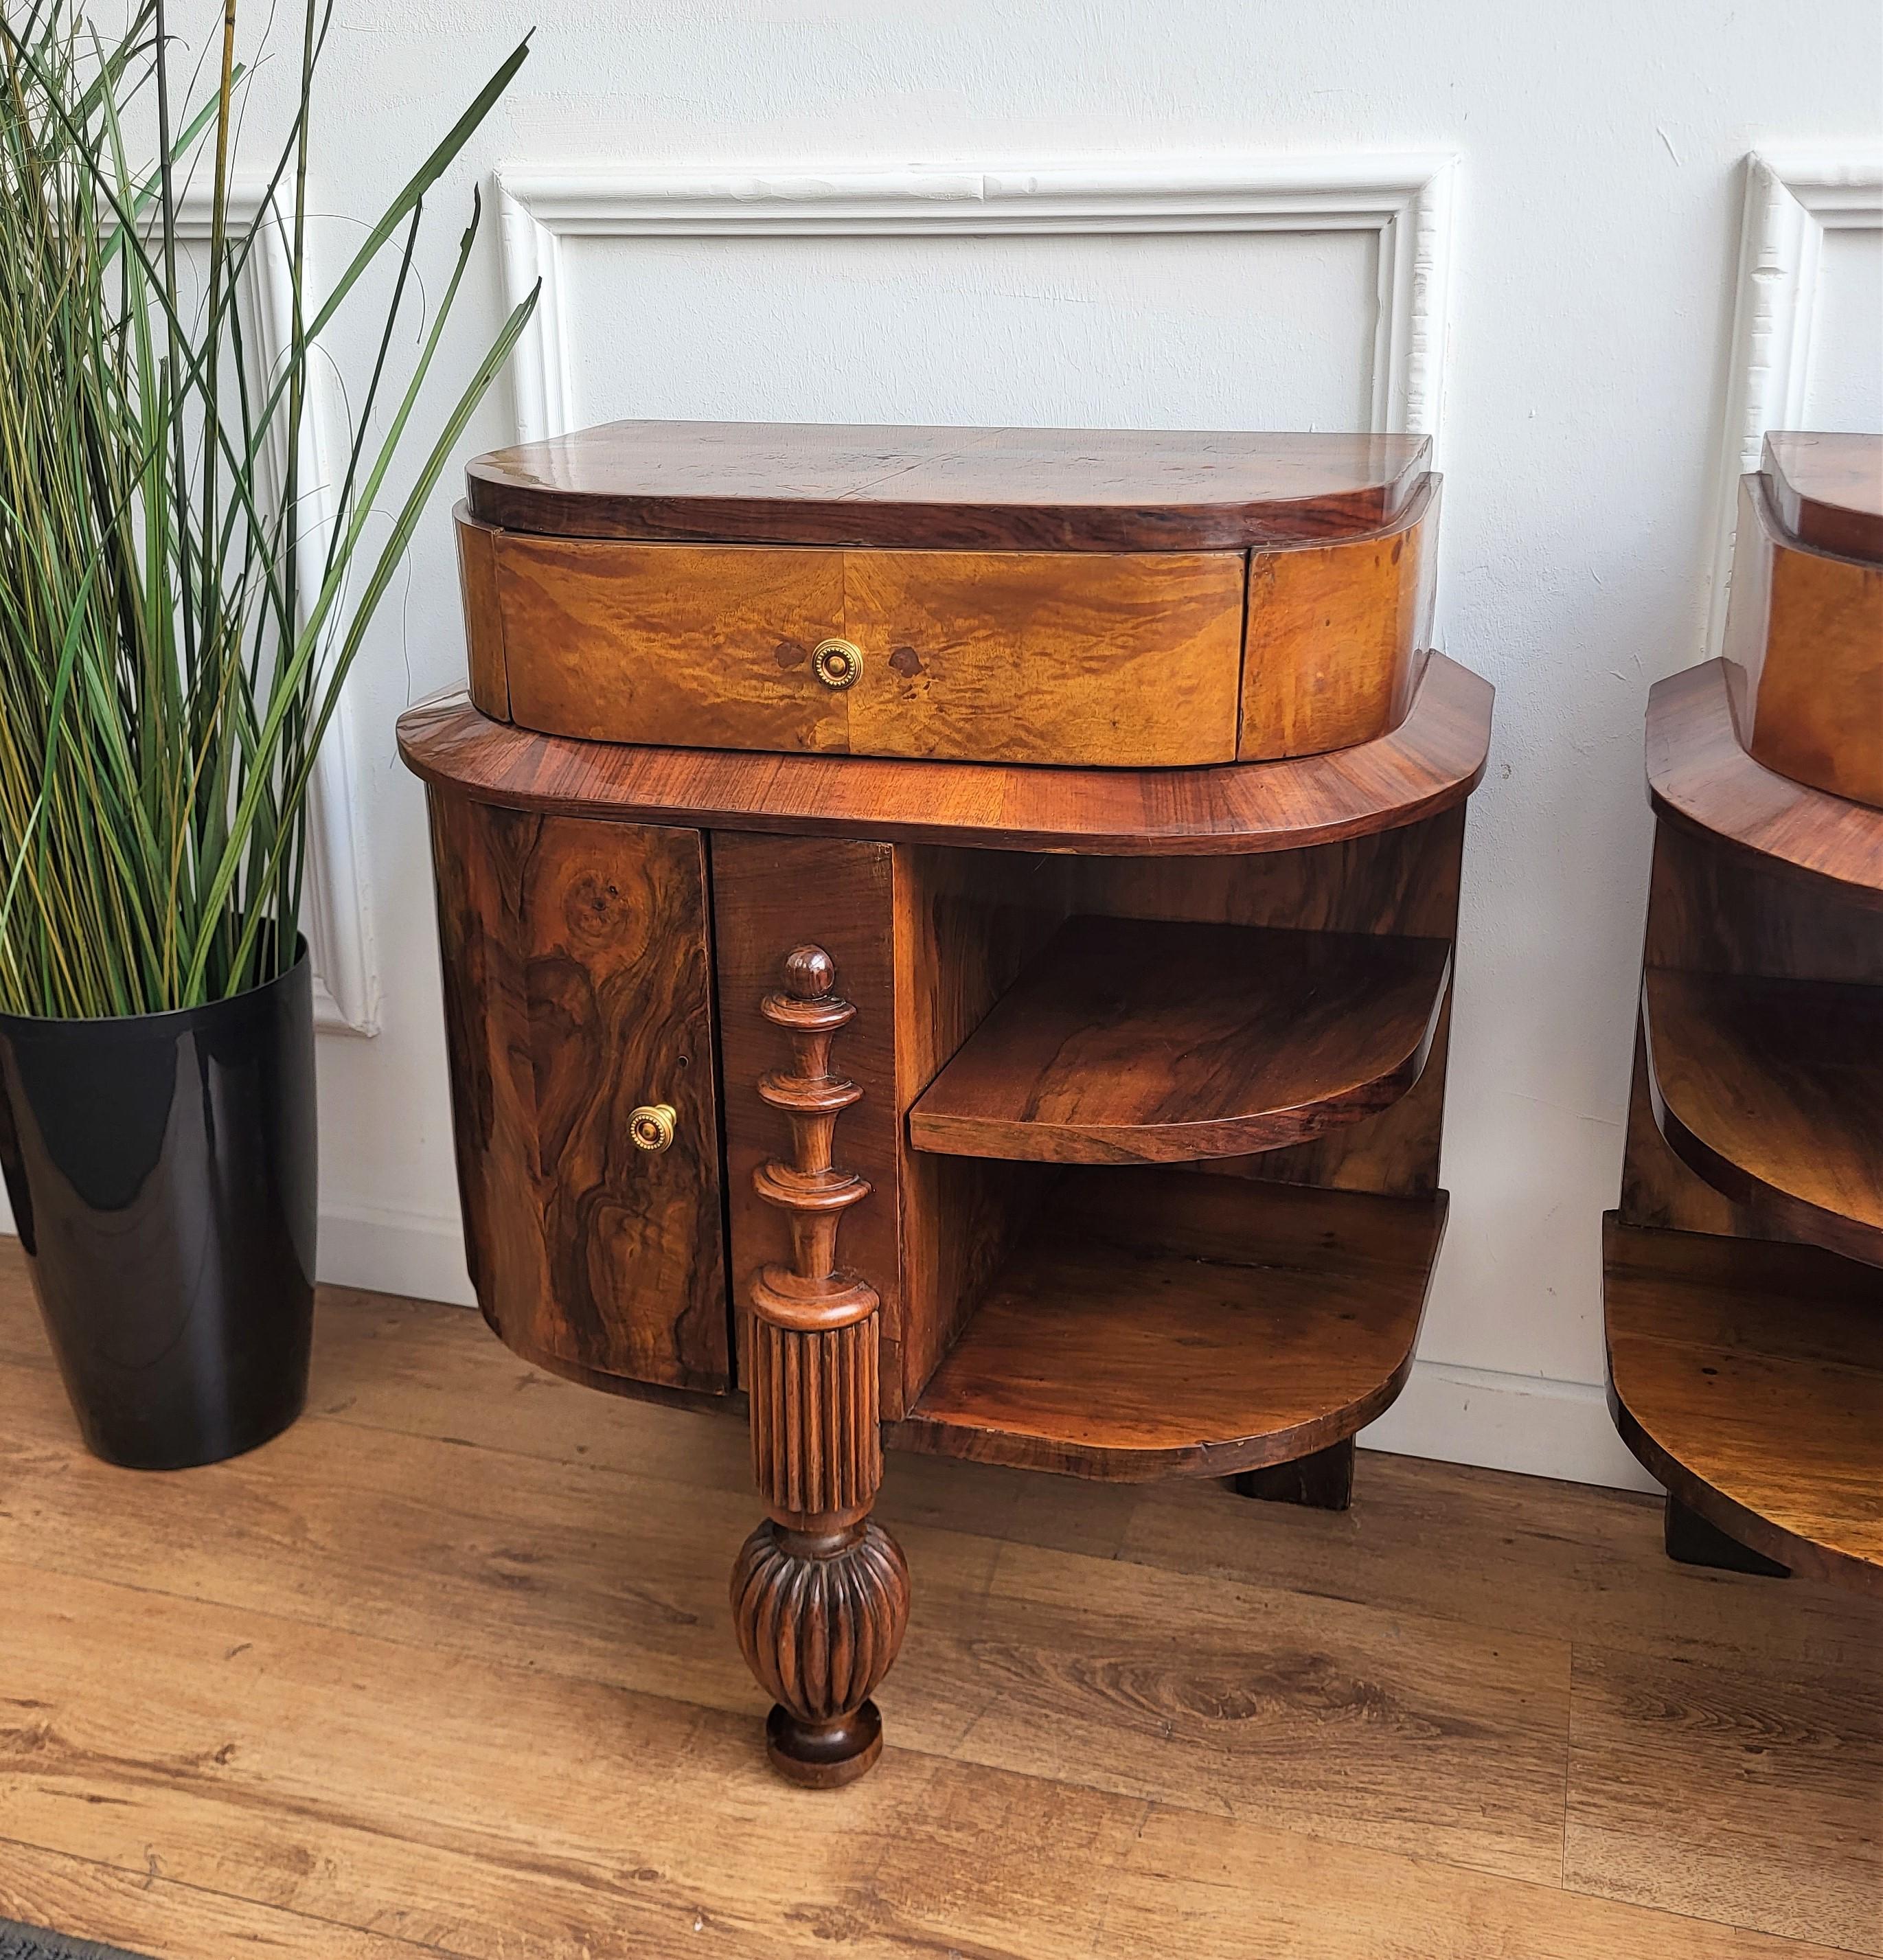 Very important, elegant and refined pair of Italian 1940s Art Deco bedside tables with great design shape and detail of every part and beautiful decors, bboth carved as well as with the burl wood veneer in typical Art Deco style at its best. This